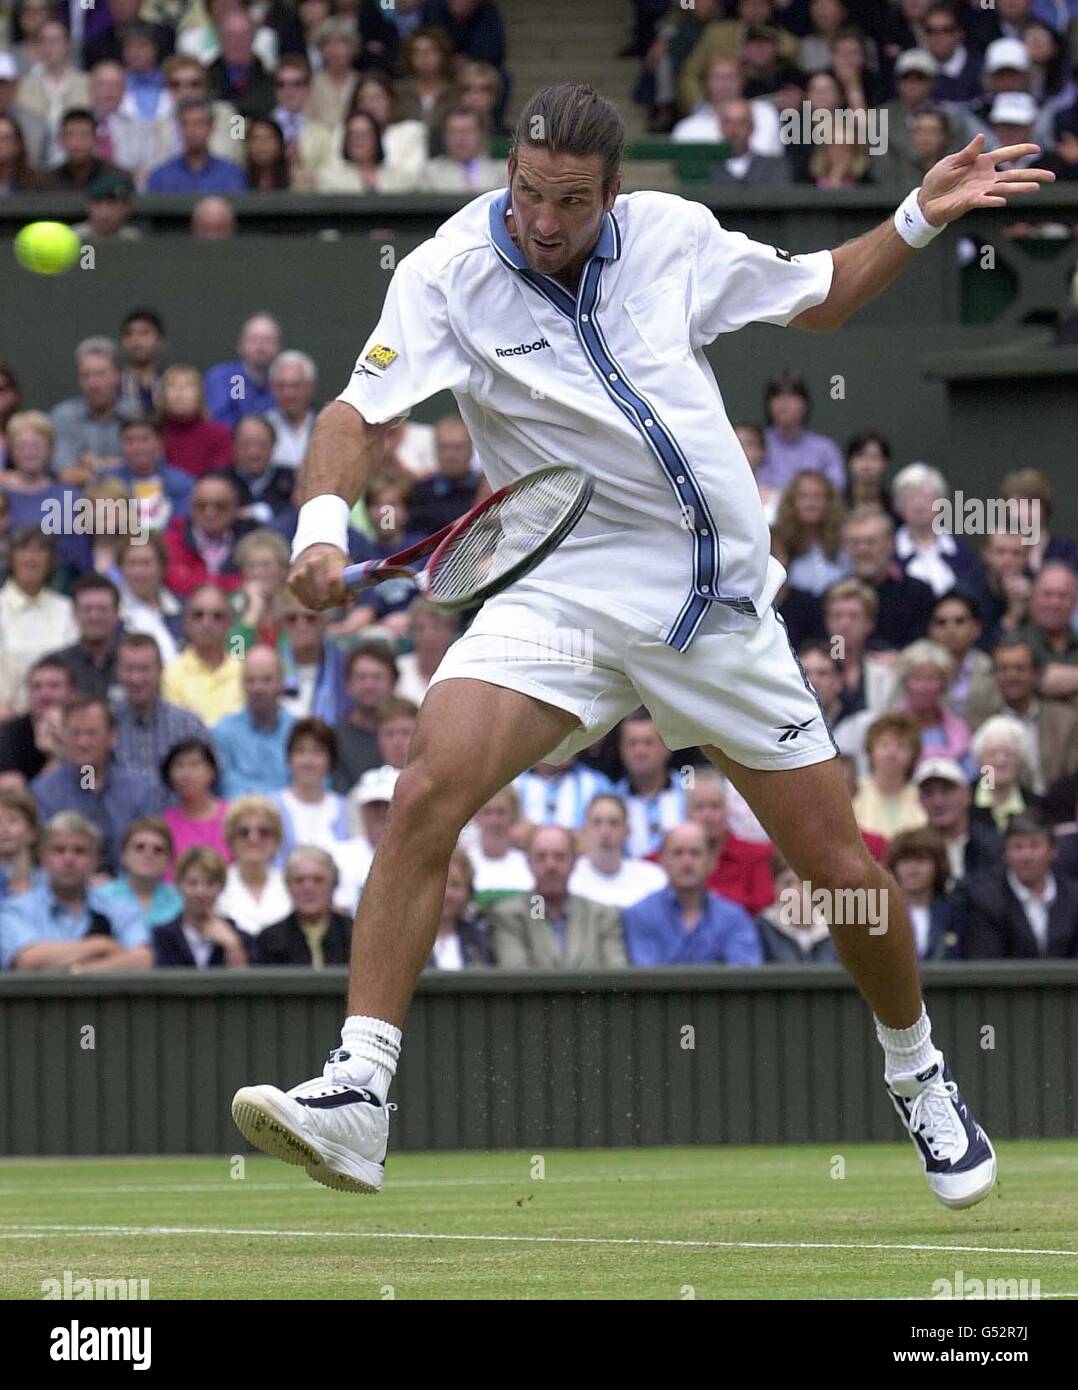 No Commercial use : Pat Rafter of Australia in action against America's  Pete Sampras, during the Men's Singles tennis Final at Wimbledon Stock  Photo - Alamy